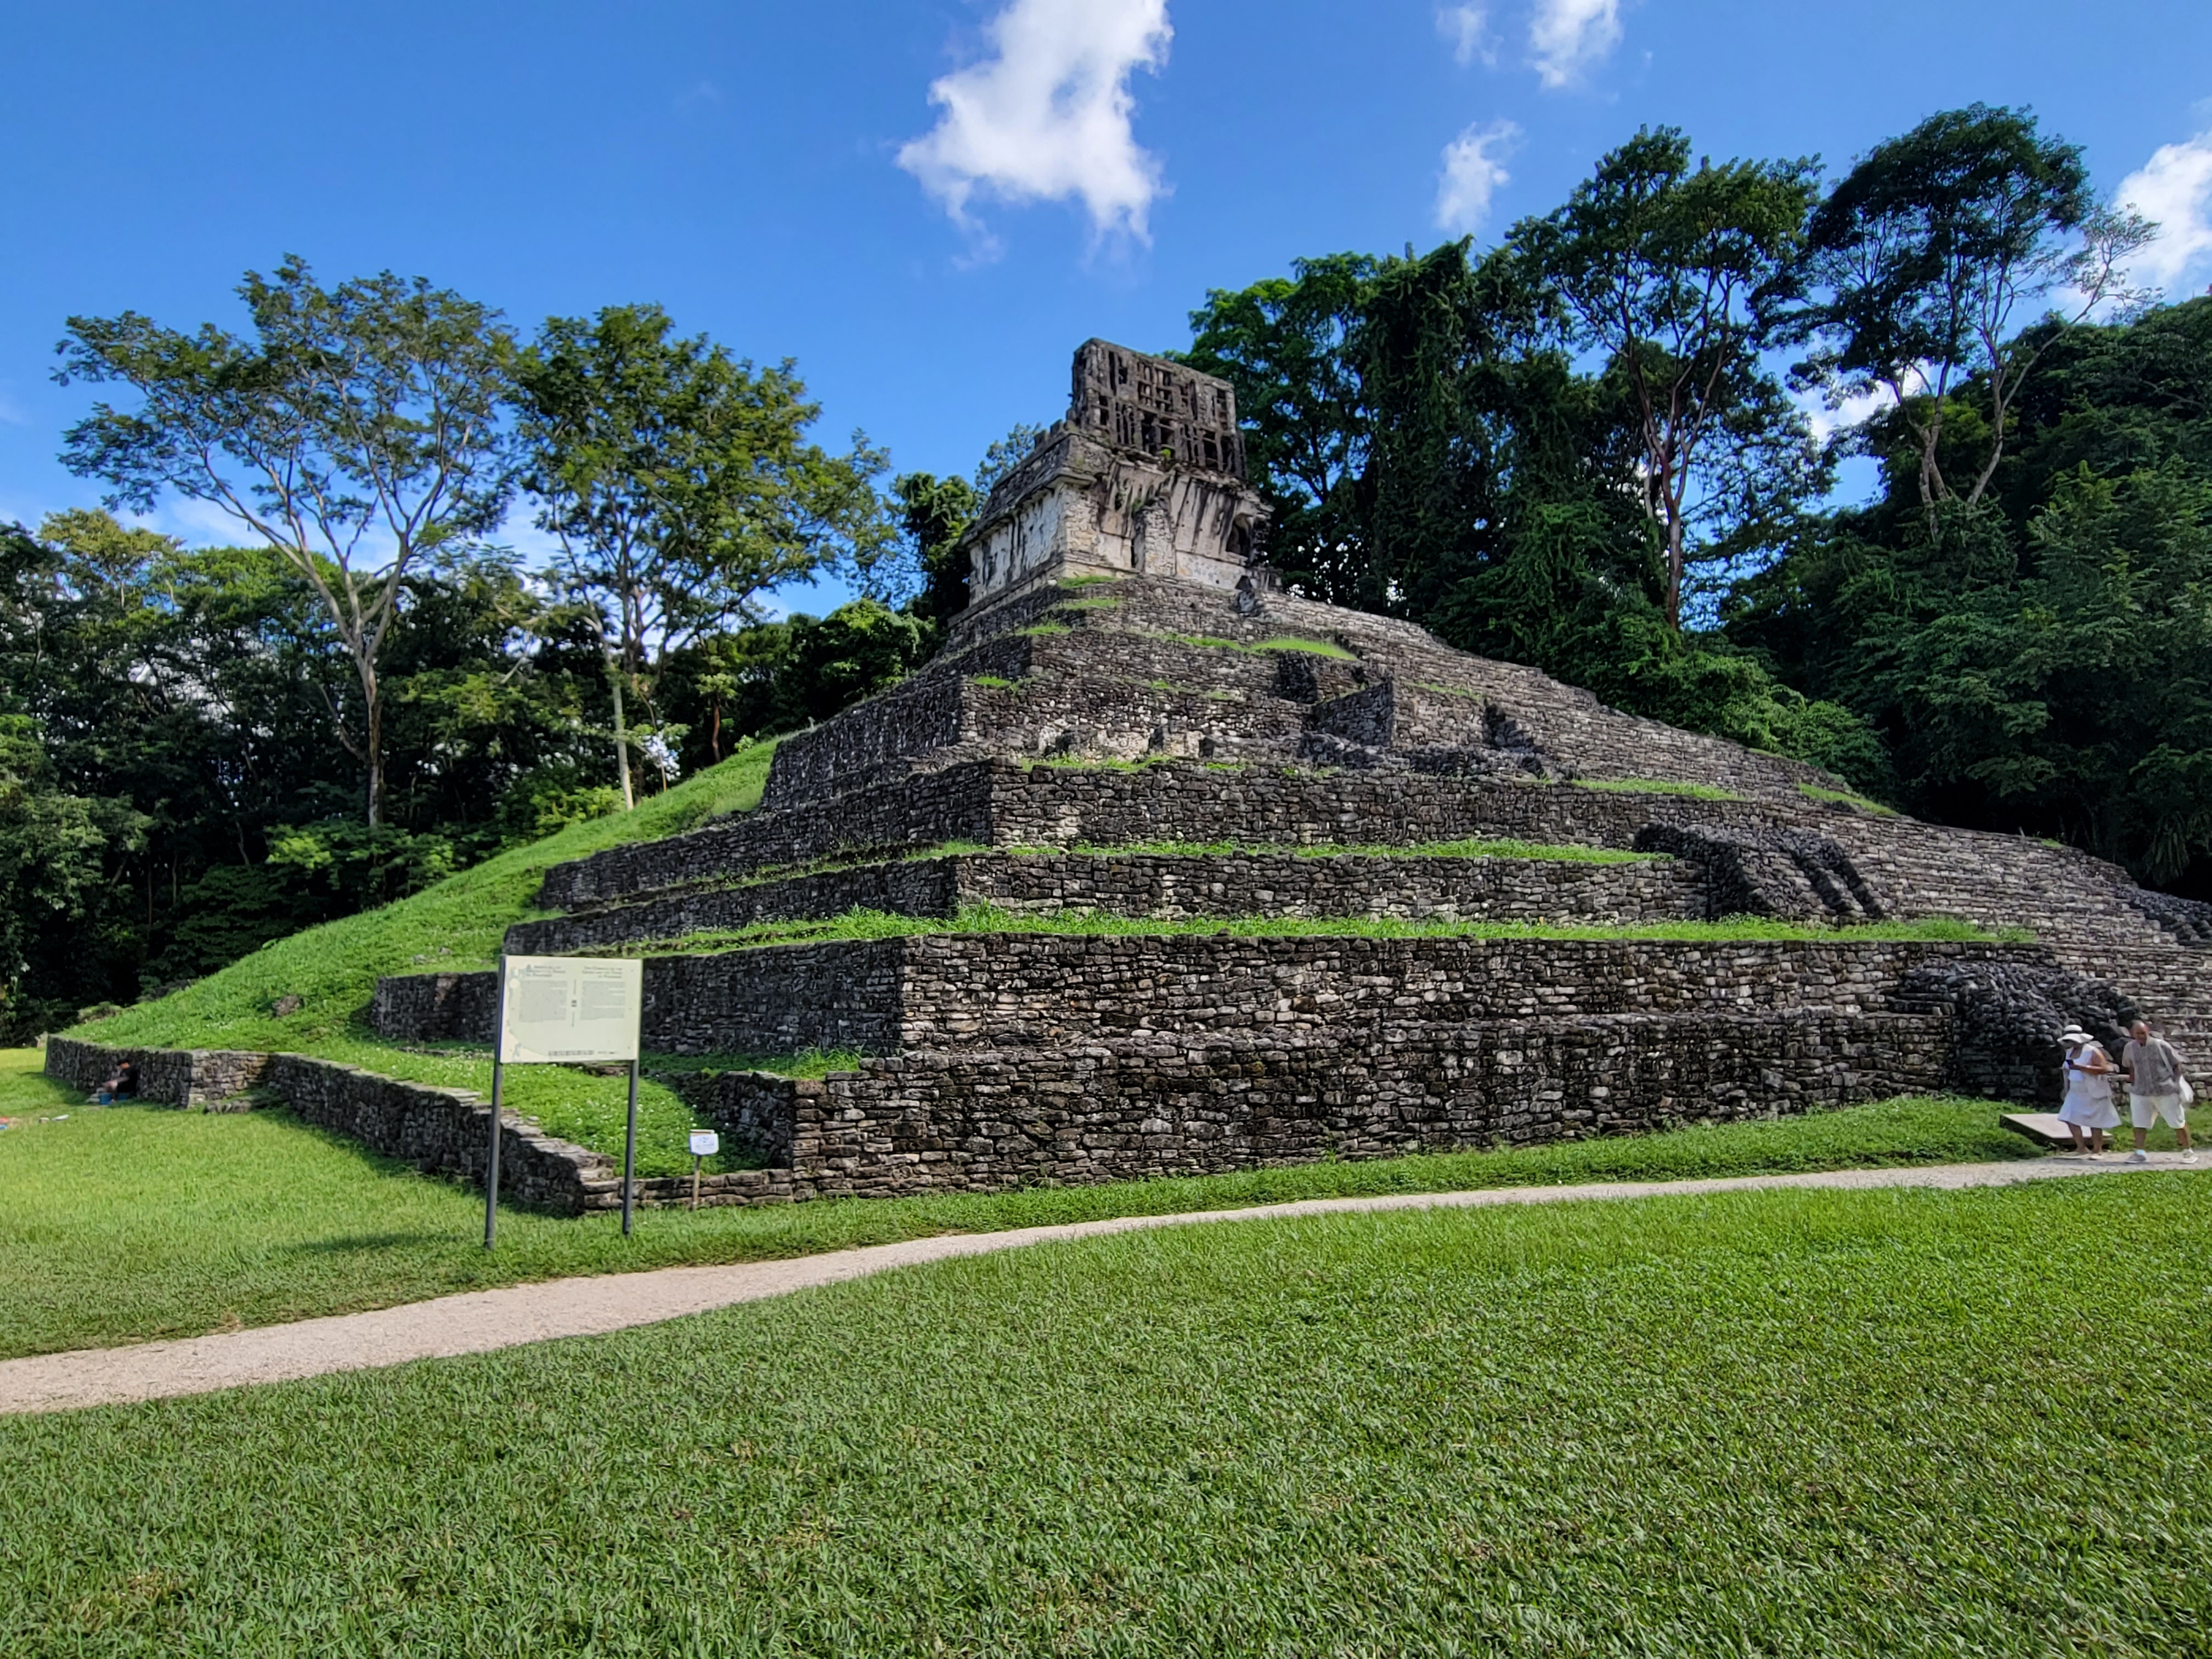 reasons to visit Palenque